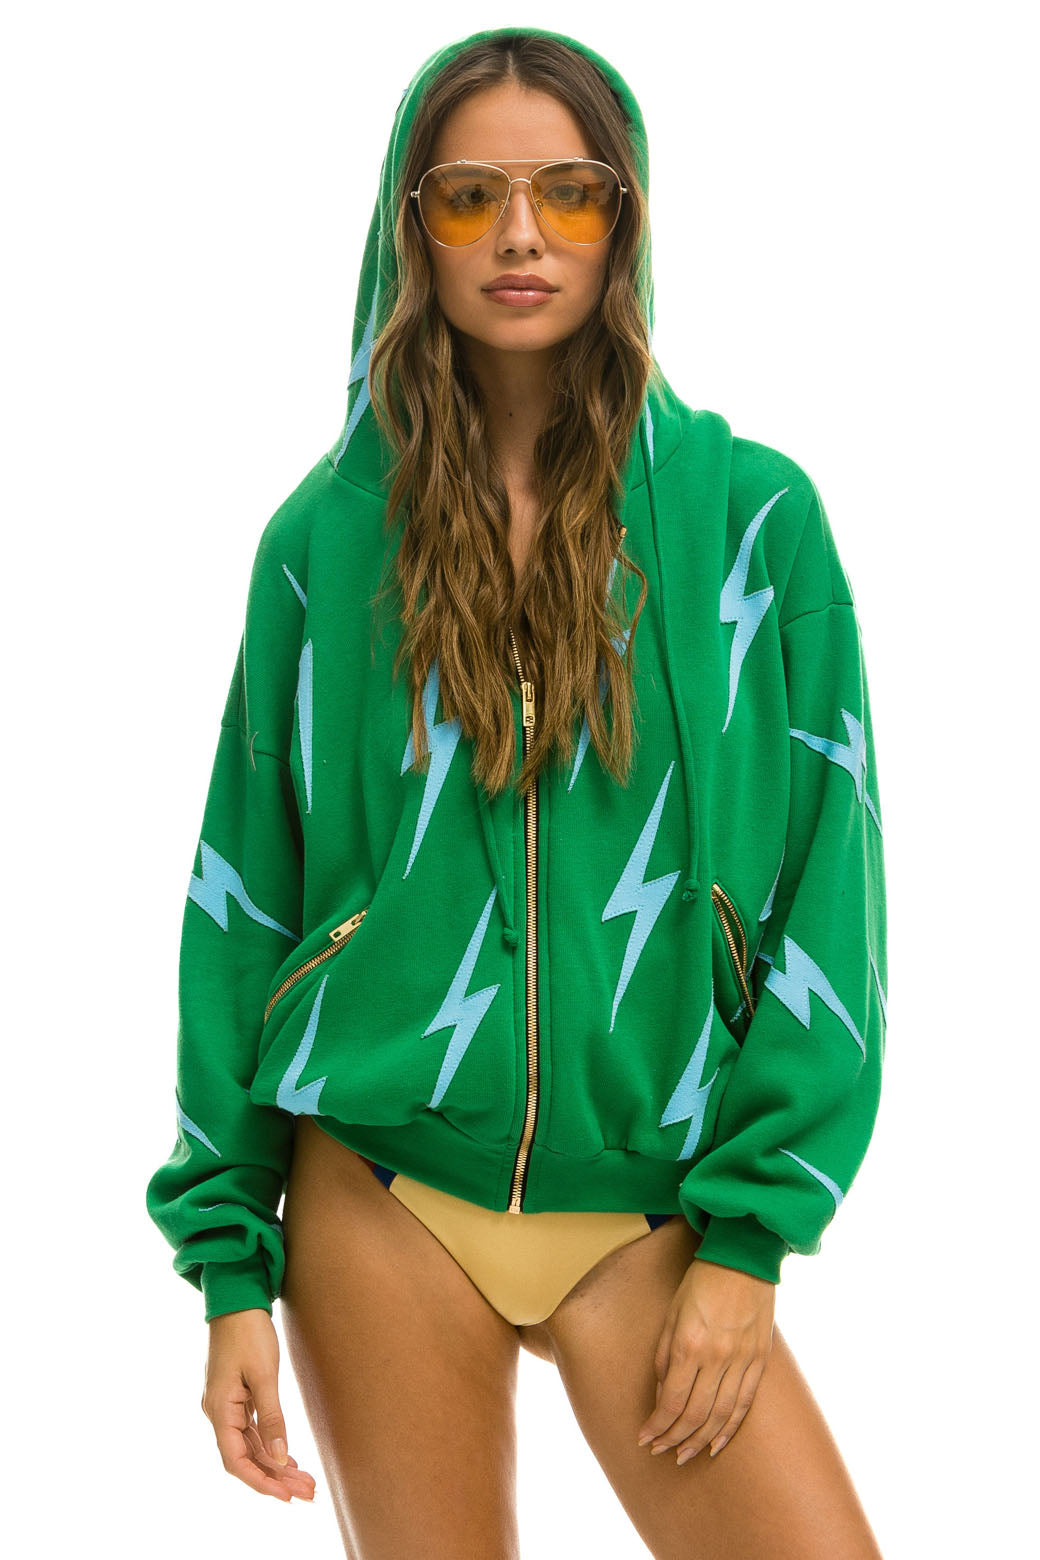 BOLT STITCH REPEAT RELAXED ZIP HOODIE WITH POCKET ZIPPERS - KELLY GREEN // BLUE Hoodie Aviator Nation 